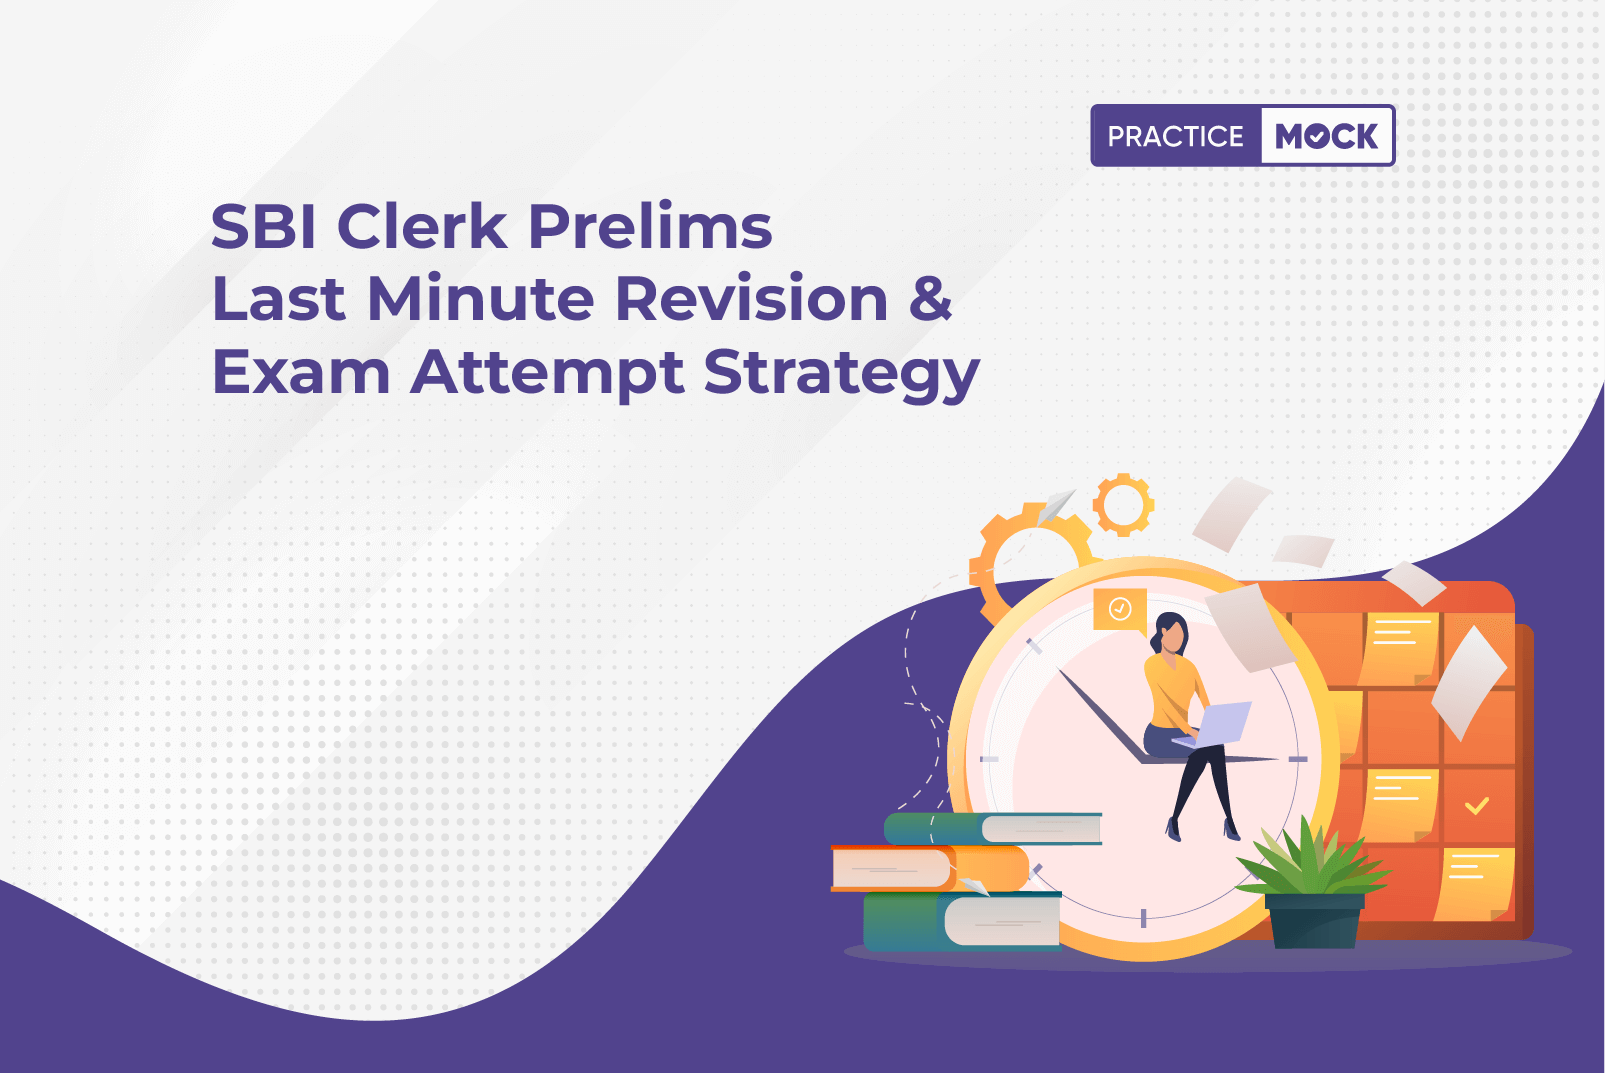 SBI Clerk Prelims Last Minute Revision & Exam Attempt Strategy